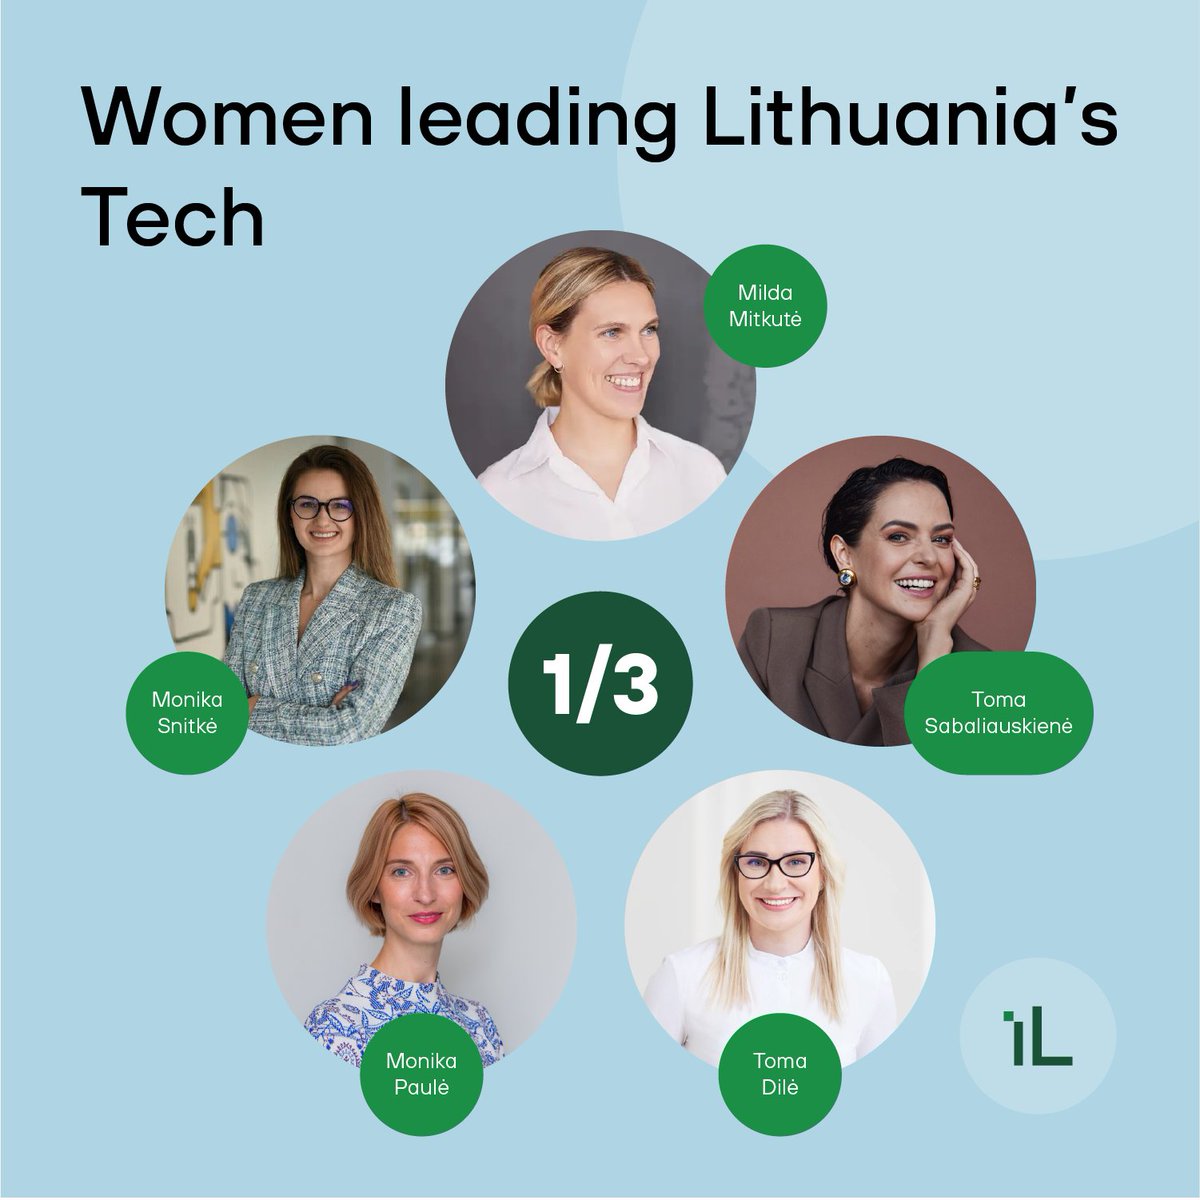 🚀 Meet the women who are not just leading but also inspiring the next generation in Lithuania's tech industry: ▪️ Milda Mitkutė, co-founder of @vinted ▪️ Toma Sabaliauskienė, Marketing Manager of @NordNewsroom ▪️ Toma Dile, Managing Director of @WeArePVcase ▪️ Monika Paule,…